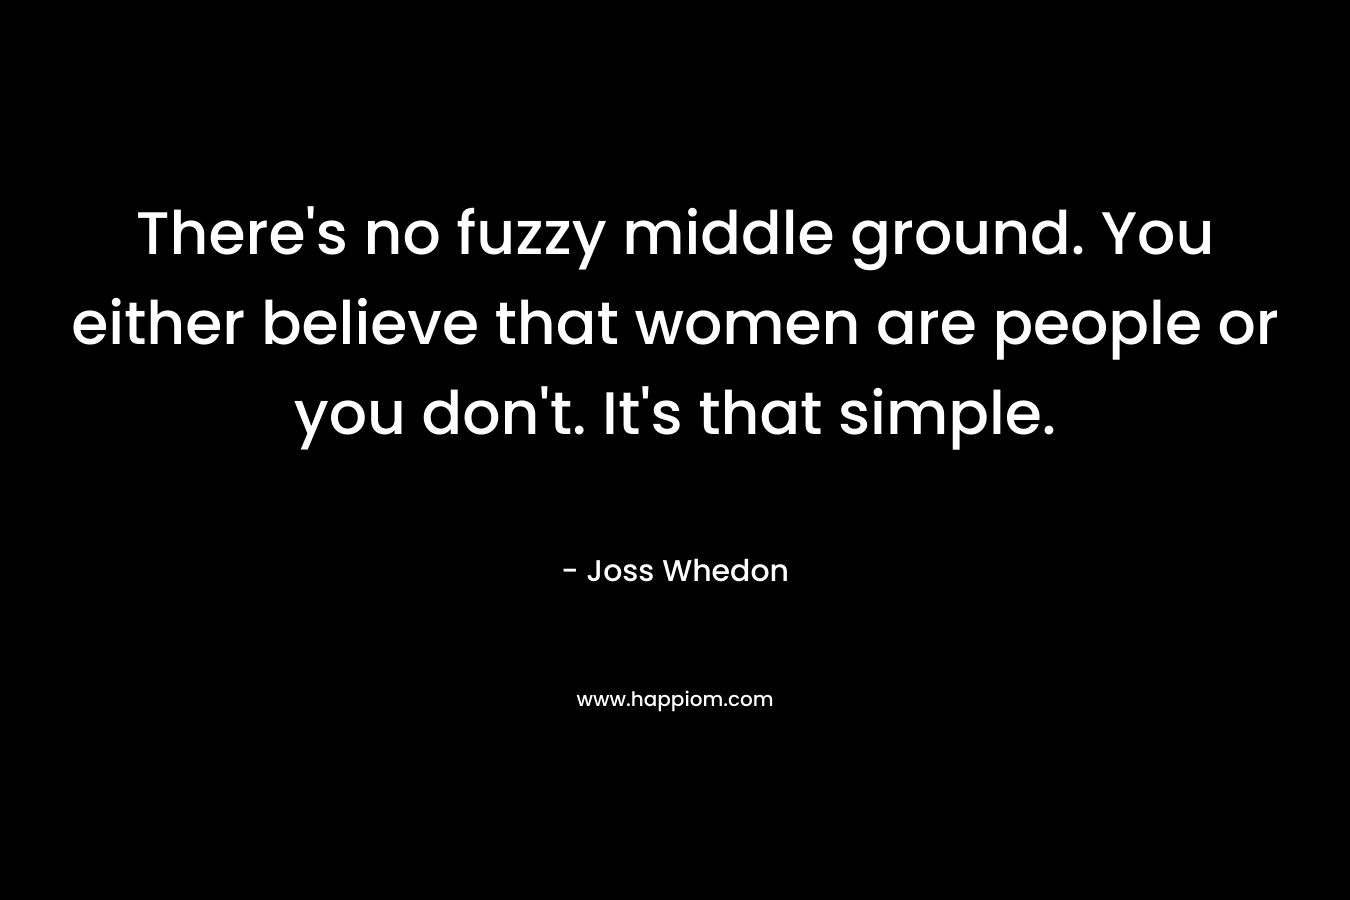 There’s no fuzzy middle ground. You either believe that women are people or you don’t. It’s that simple. – Joss Whedon